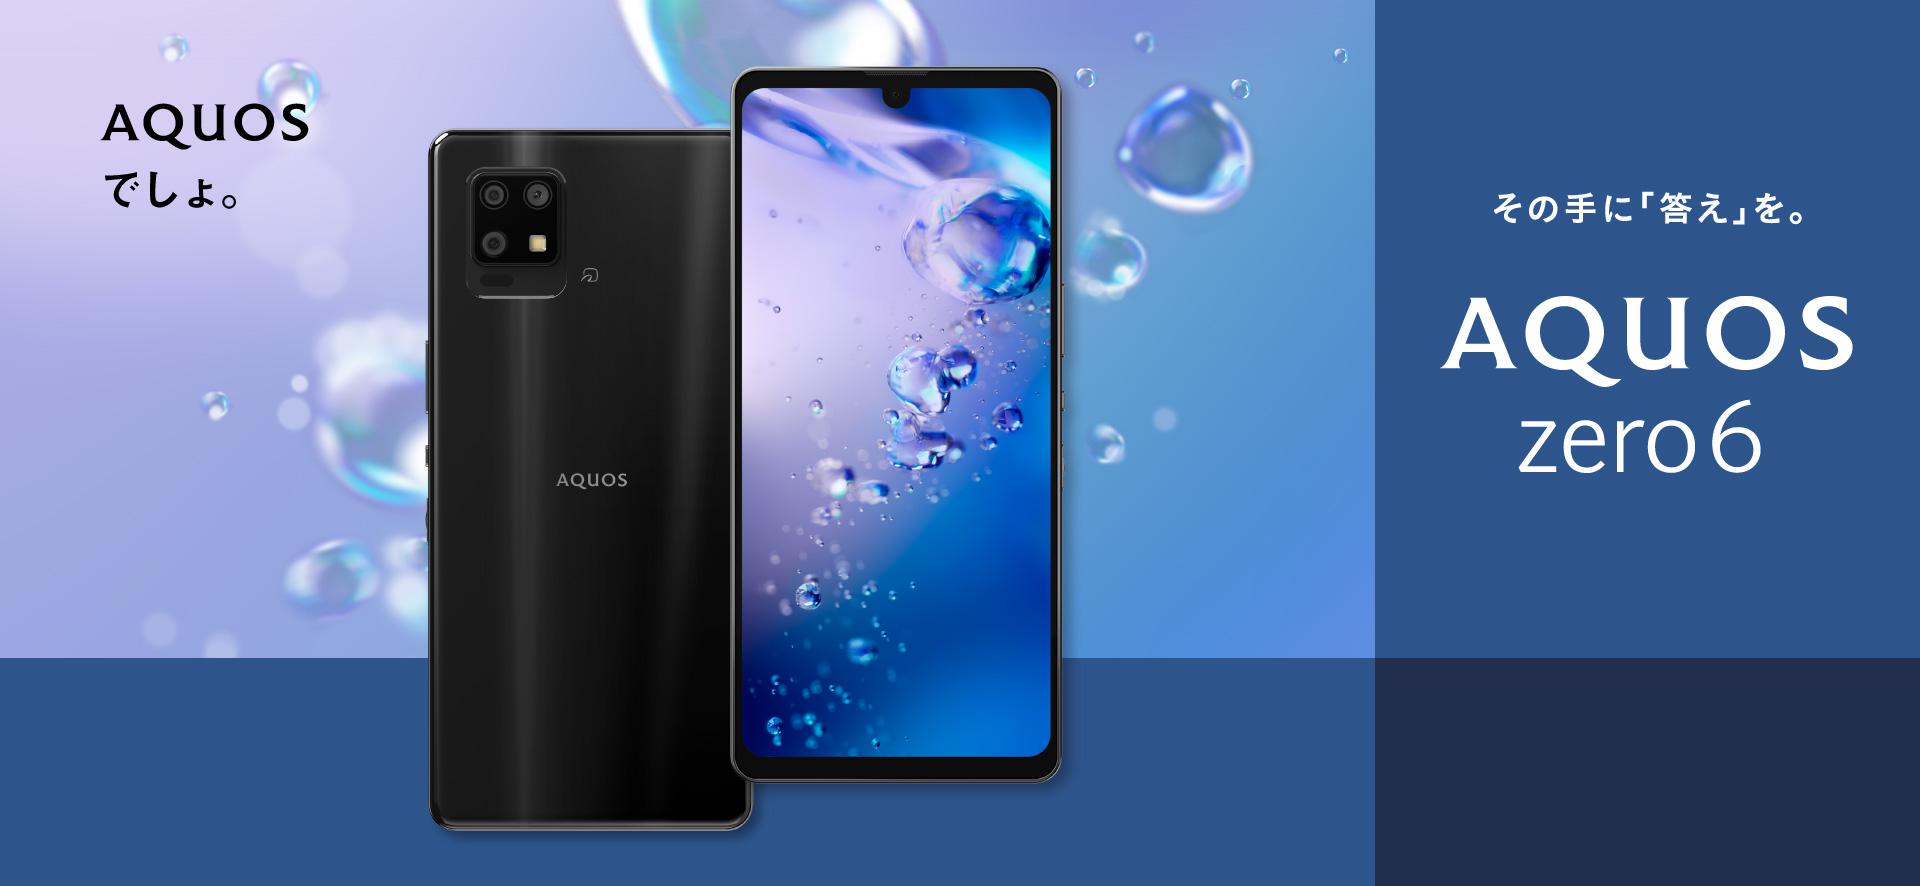 Sharp announced the price tag of AQUOS Zero 6 smartphone with 240Hz screen, Snapdragon 750G chip and IP68 protection 